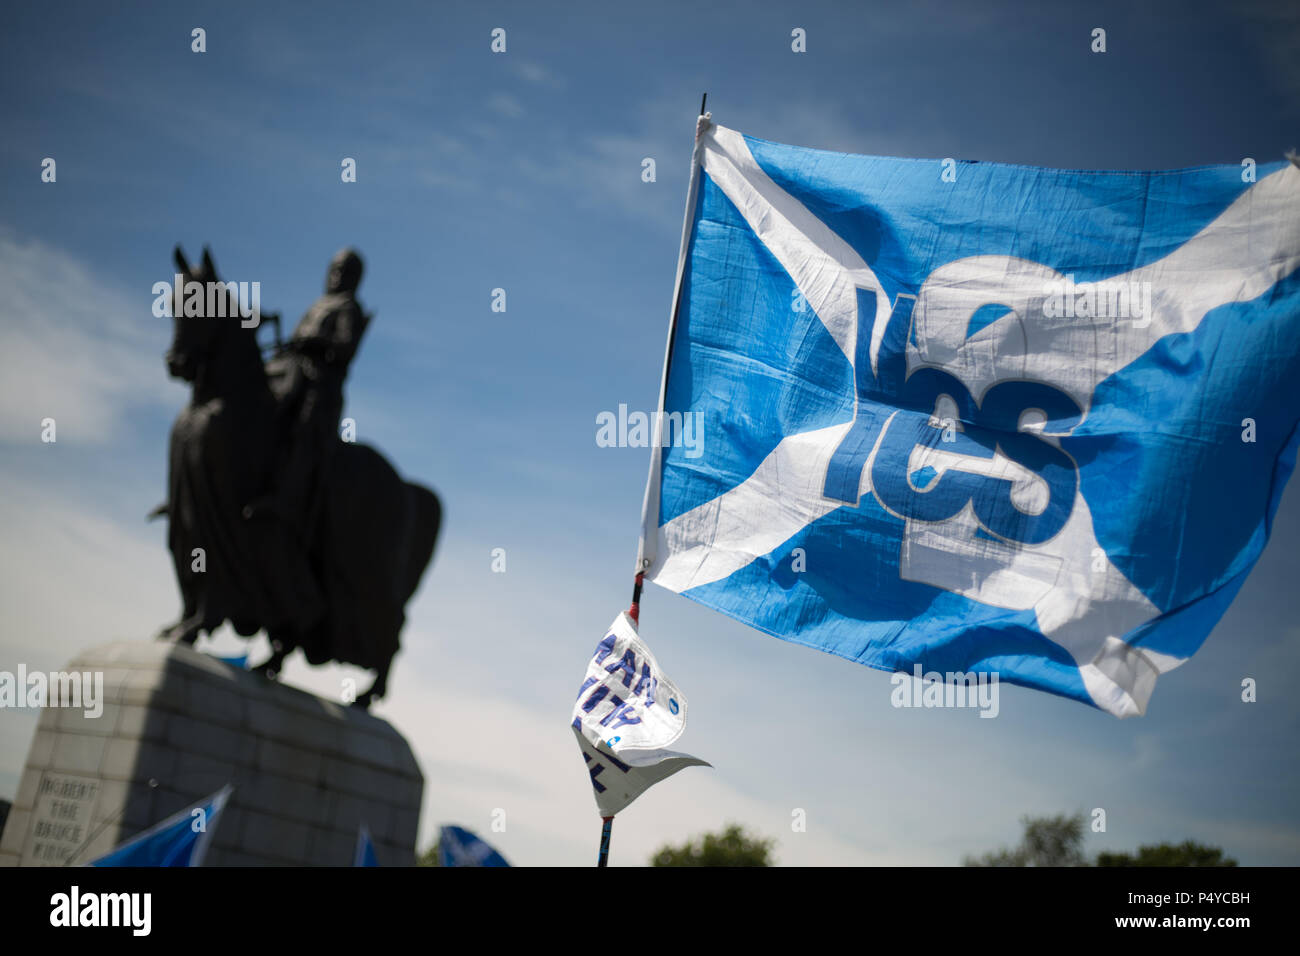 Stirling, Scotland, UK. 23rd June 2018.  Pro-Scottish Independence march, organised in the 'All Under One Banner' name, through the streets and to the battlefield, and statue of King Robert the Bruce,  in Bannockburn on the 704th anniverary of the Battle of Bannockburn. It was estimated that 10,000 people took part in the march calling for a second independence referendum. Photo credit Jeremy Sutton-Hibbert/Alamy Live News. Stock Photo